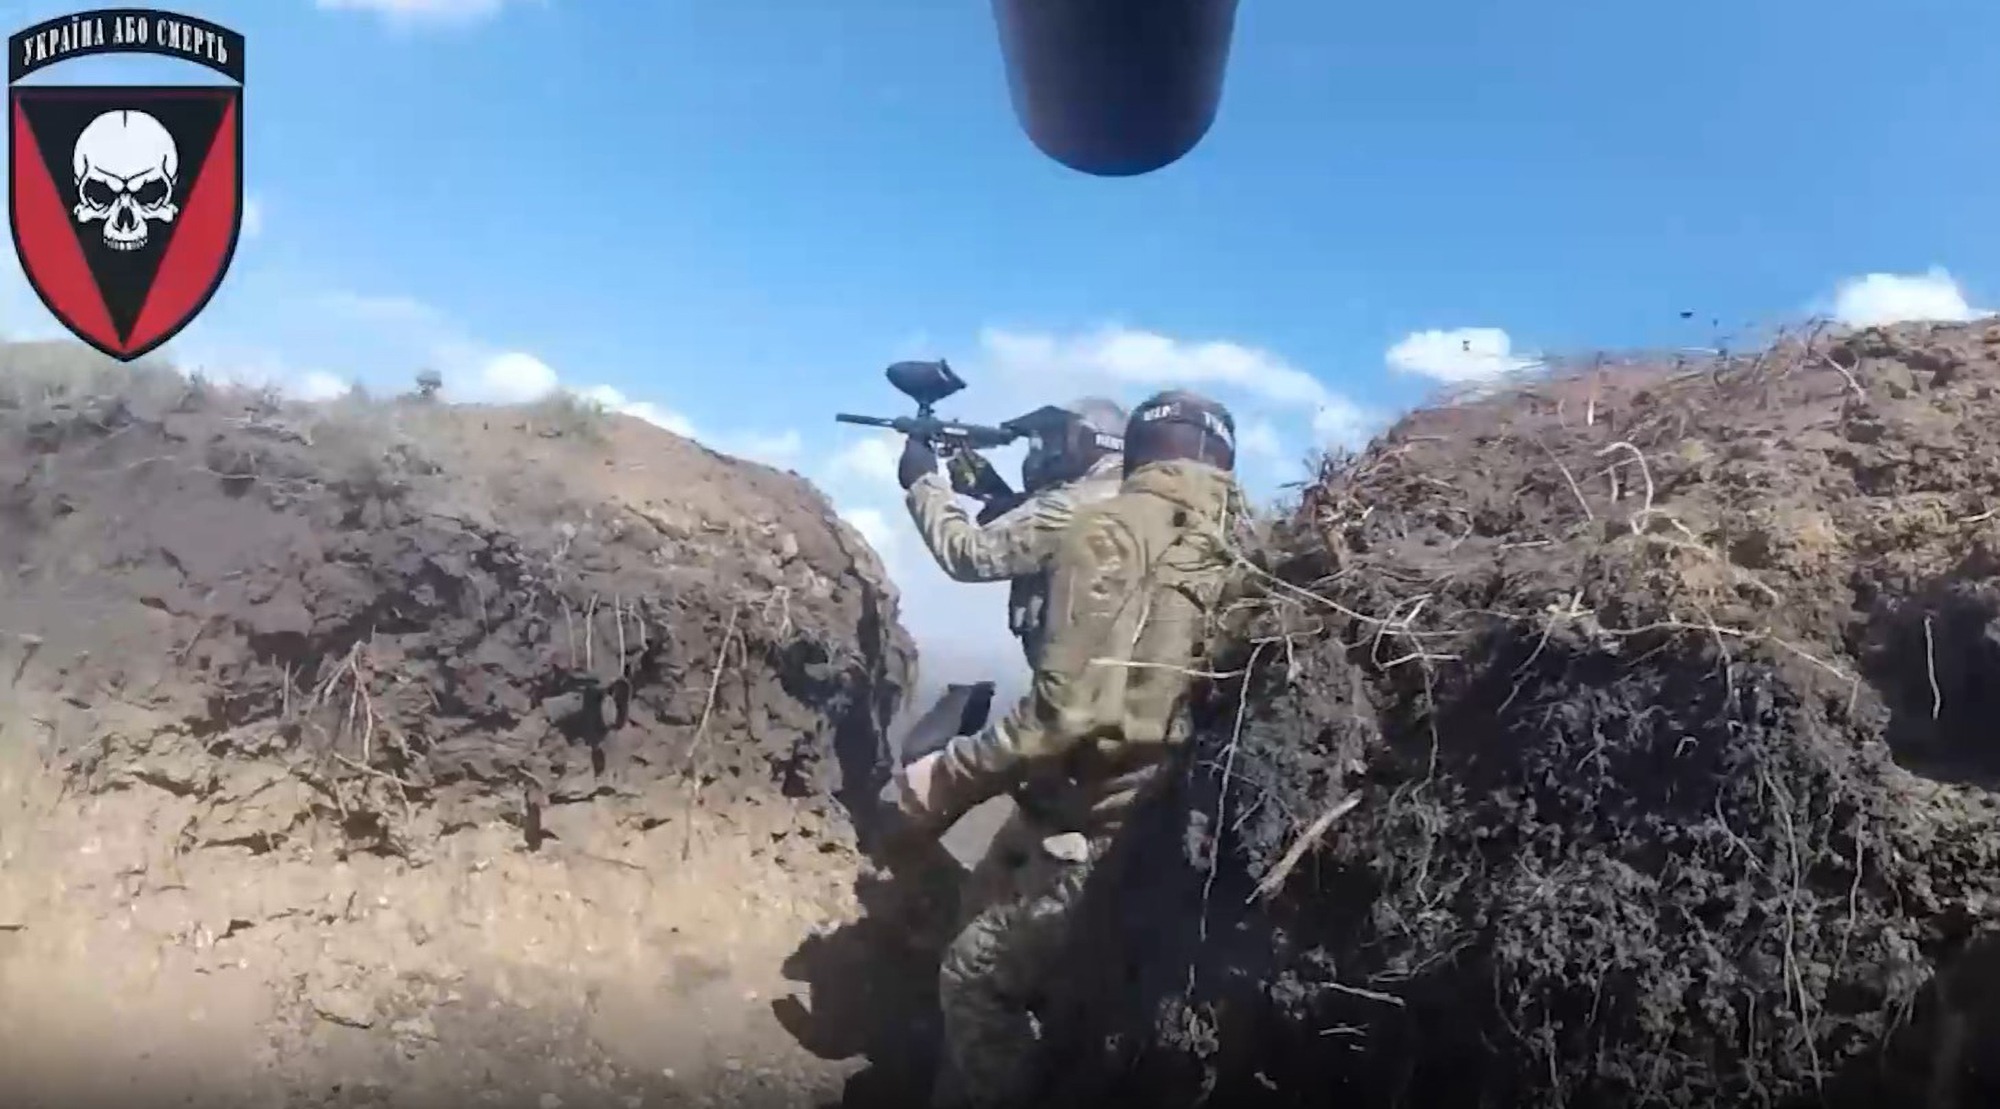 Ukrainian Soldiers Use Paintball Guns To Train Storming Trenches And Taking Out Russian Soldiers